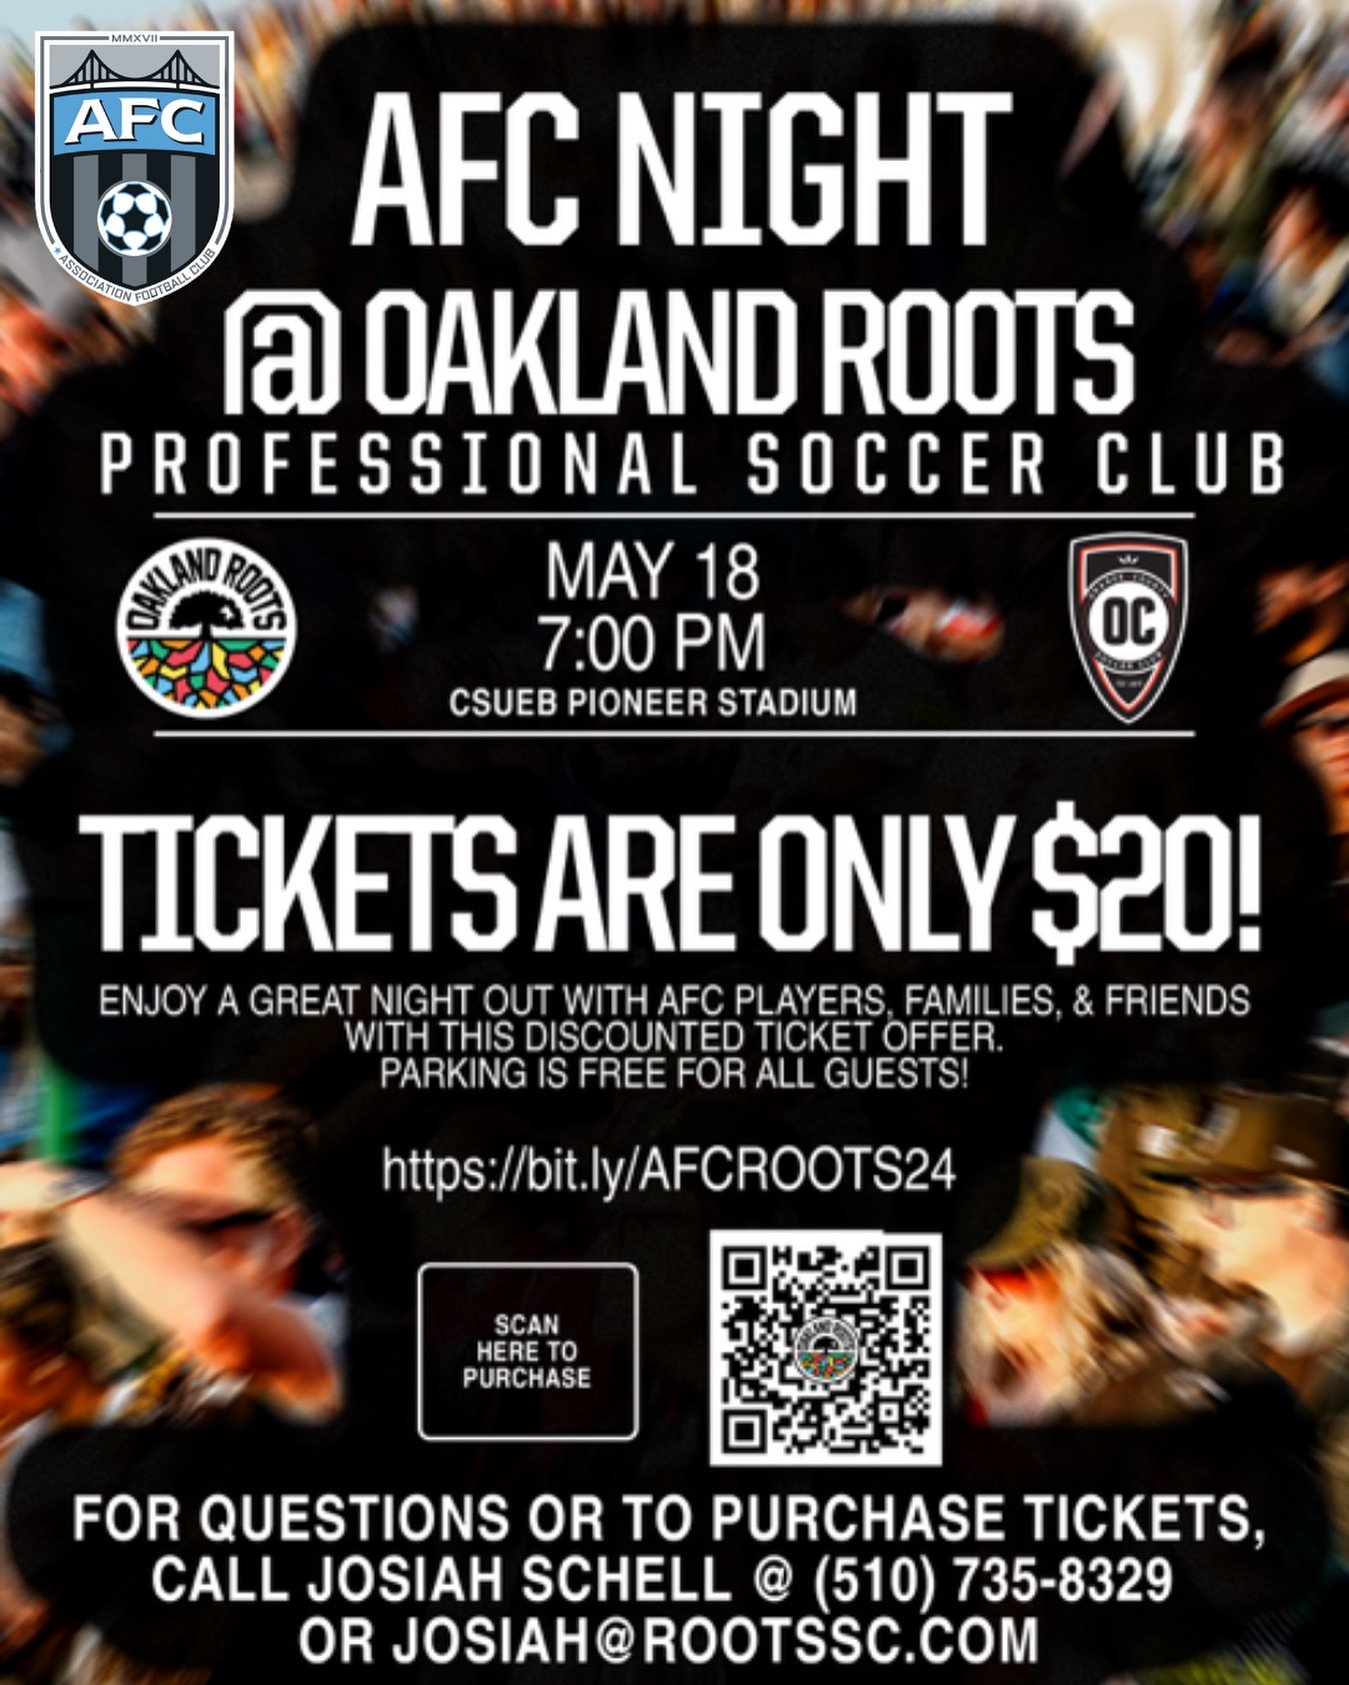 Join AFC on May 18th for the @oaklandroots match!